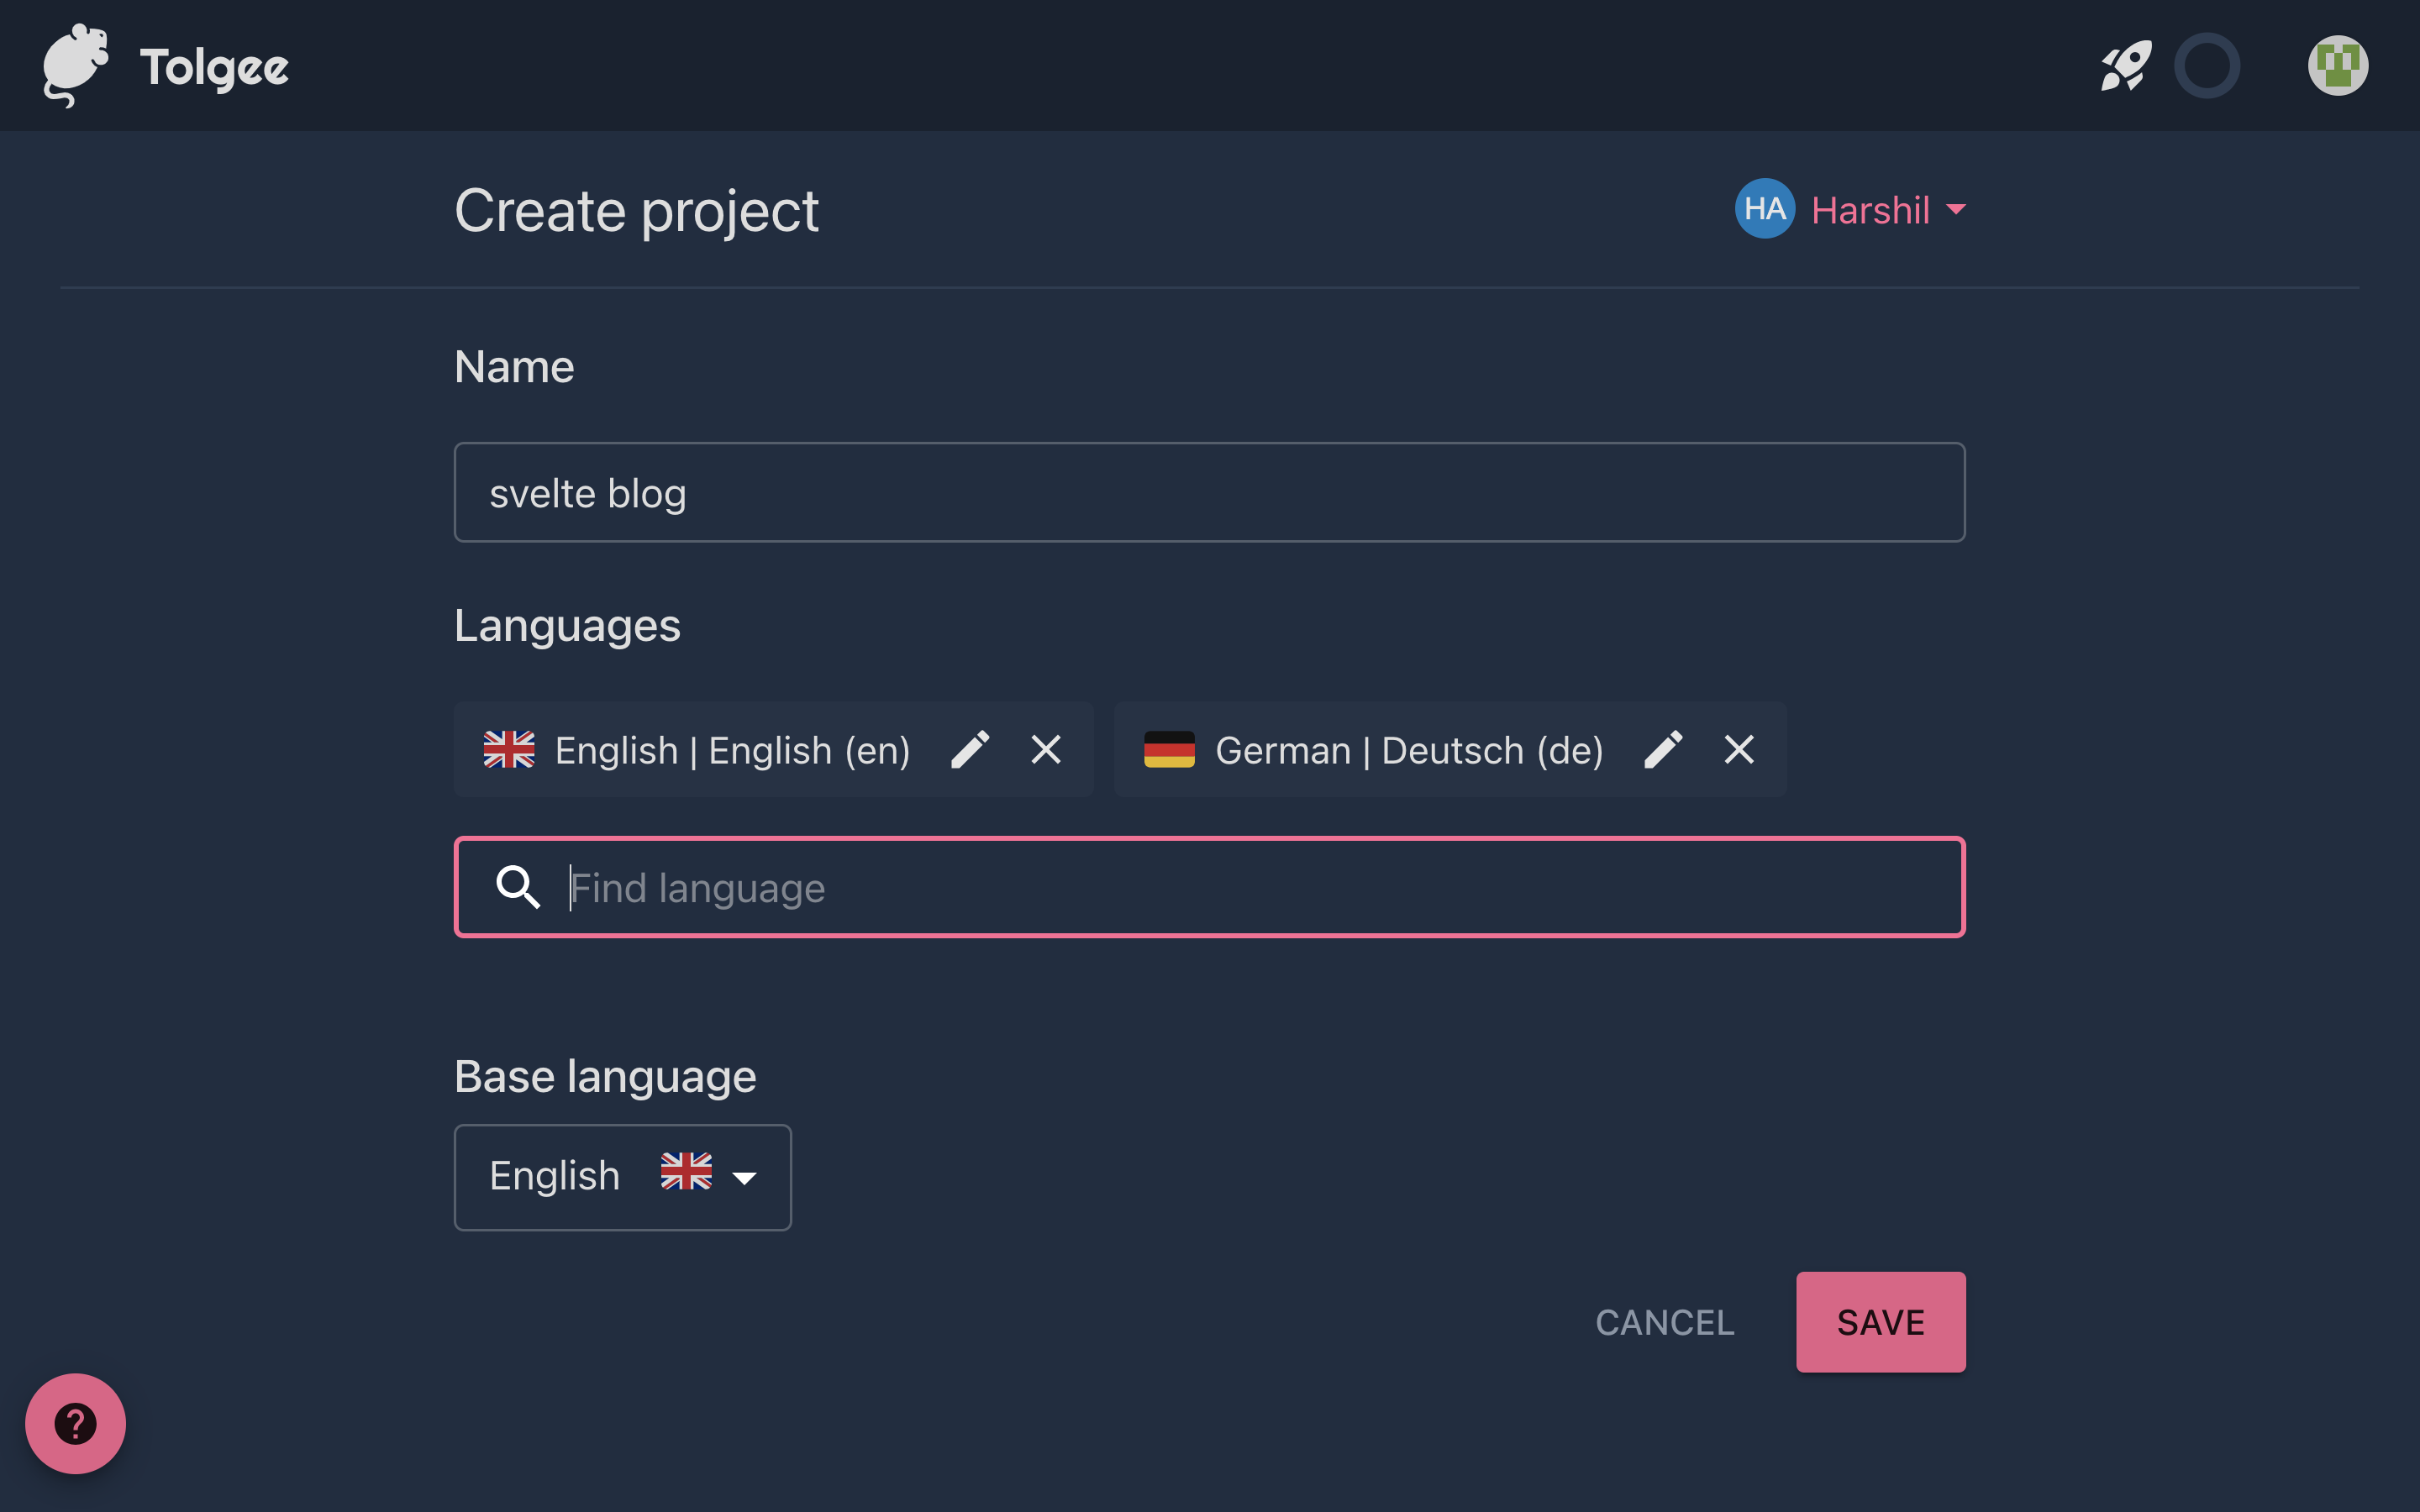 Screenshot of the Create Project page on the Tolgee platform